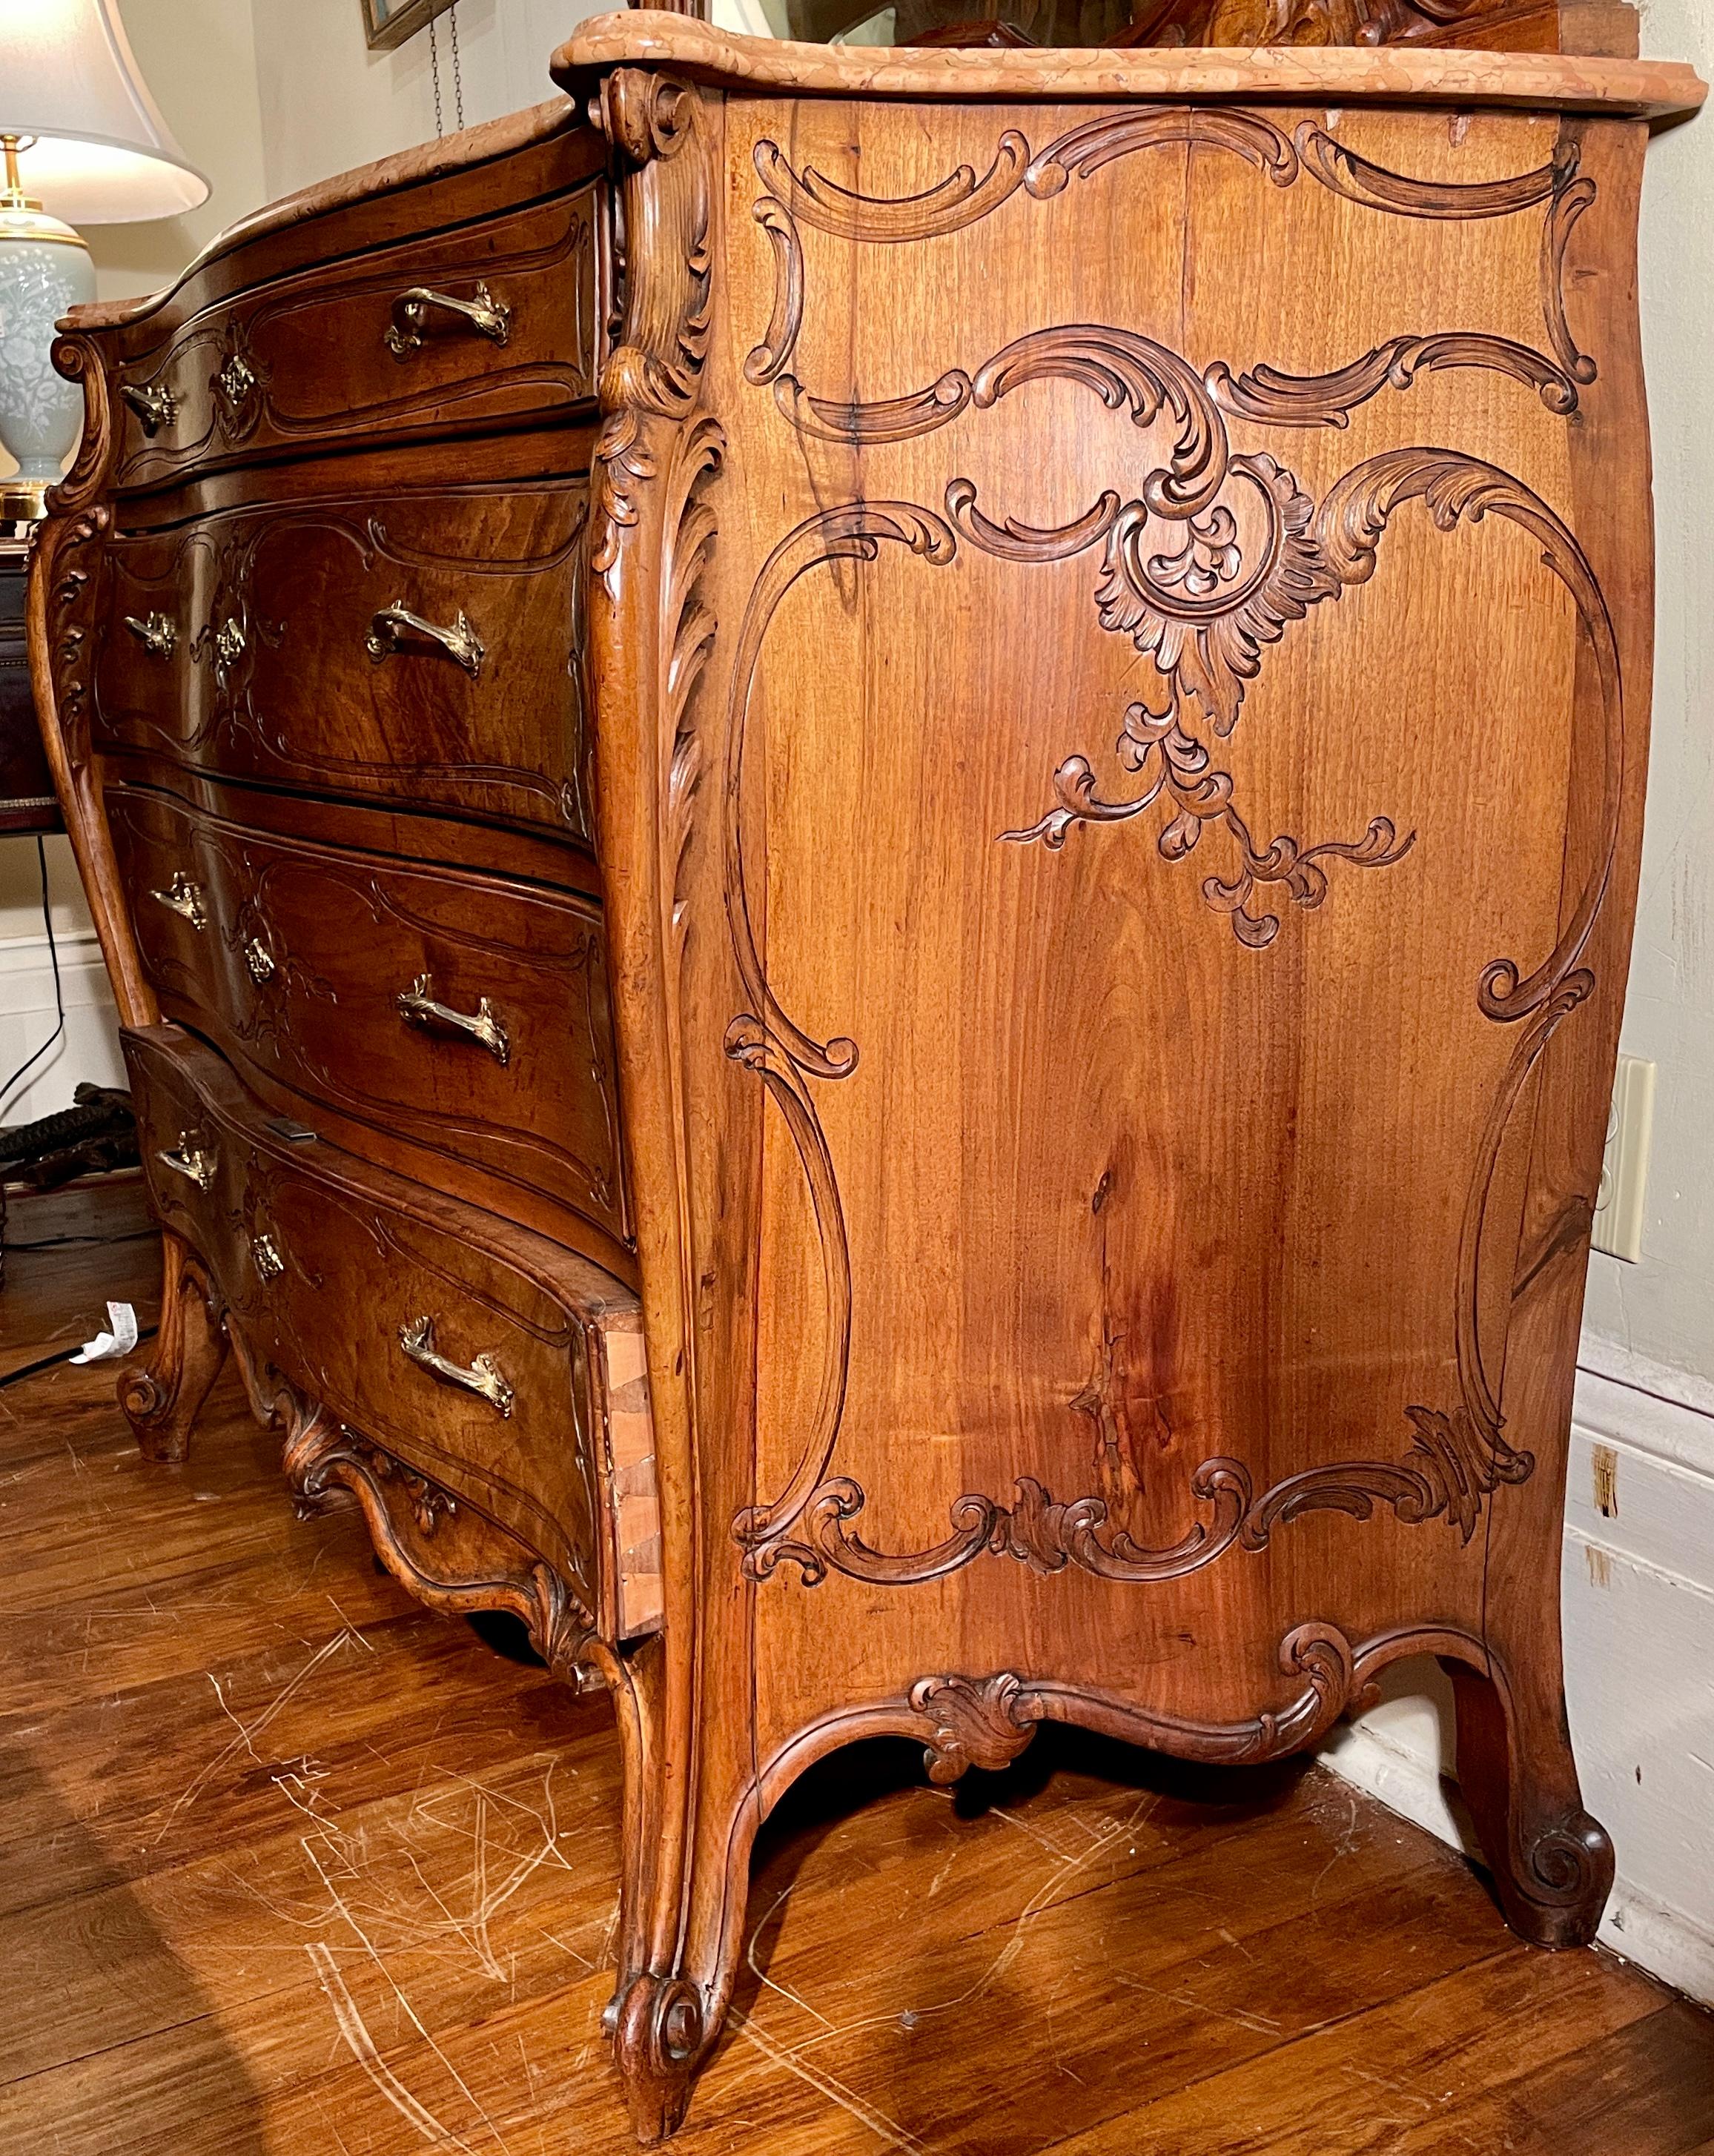 Antique French Walnut & Marble-Top Bombè Chest of Drawers with Mirror Circa 1890 For Sale 3